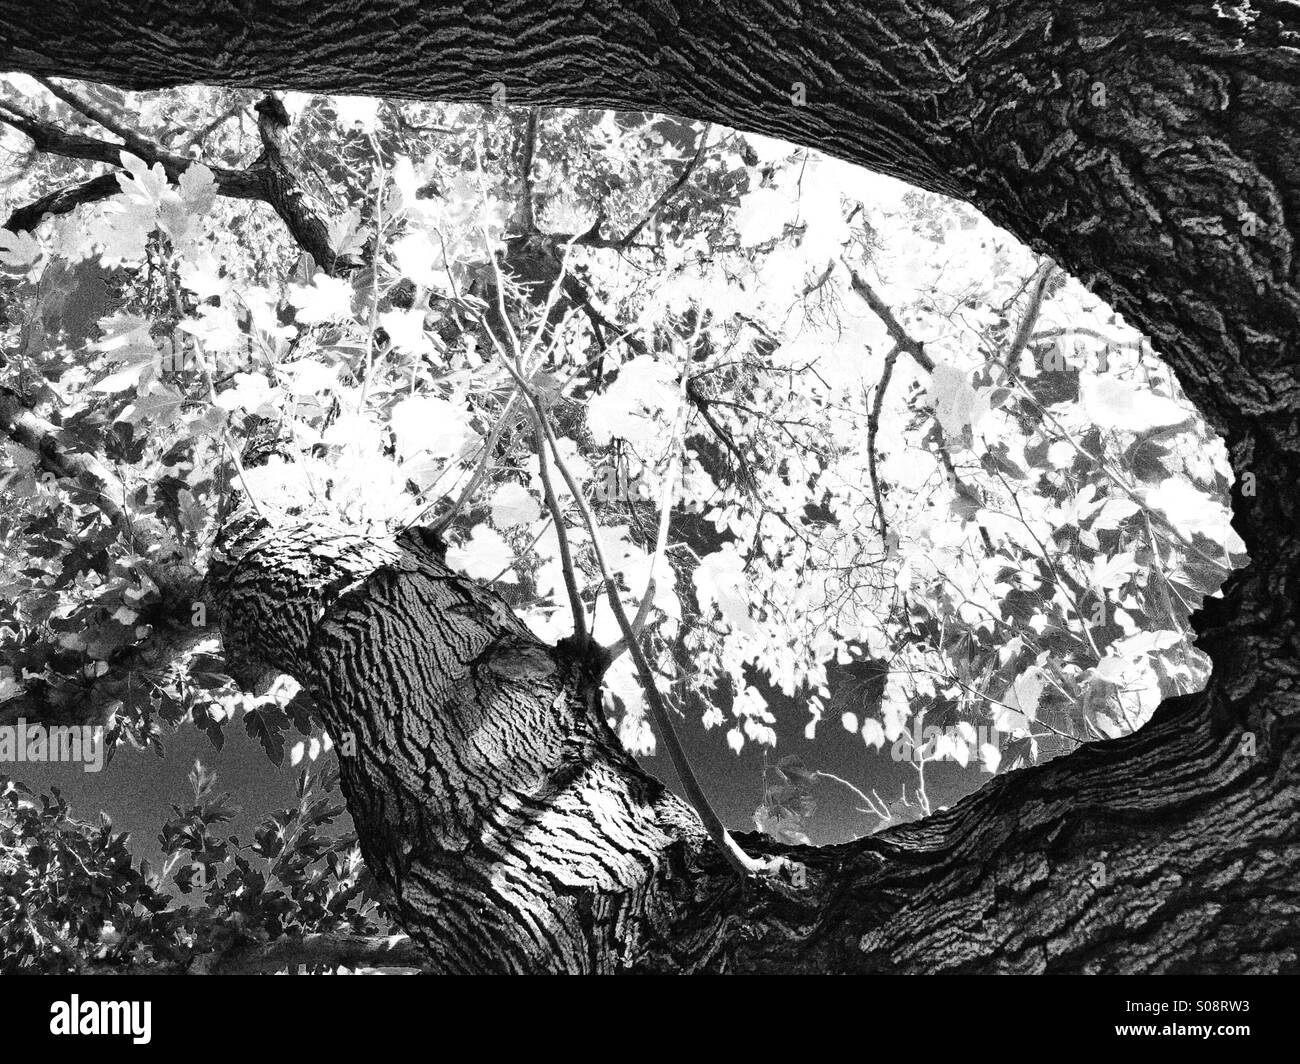 B&W giant tree trunk and branches with leaves in autumn in black and white Stock Photo